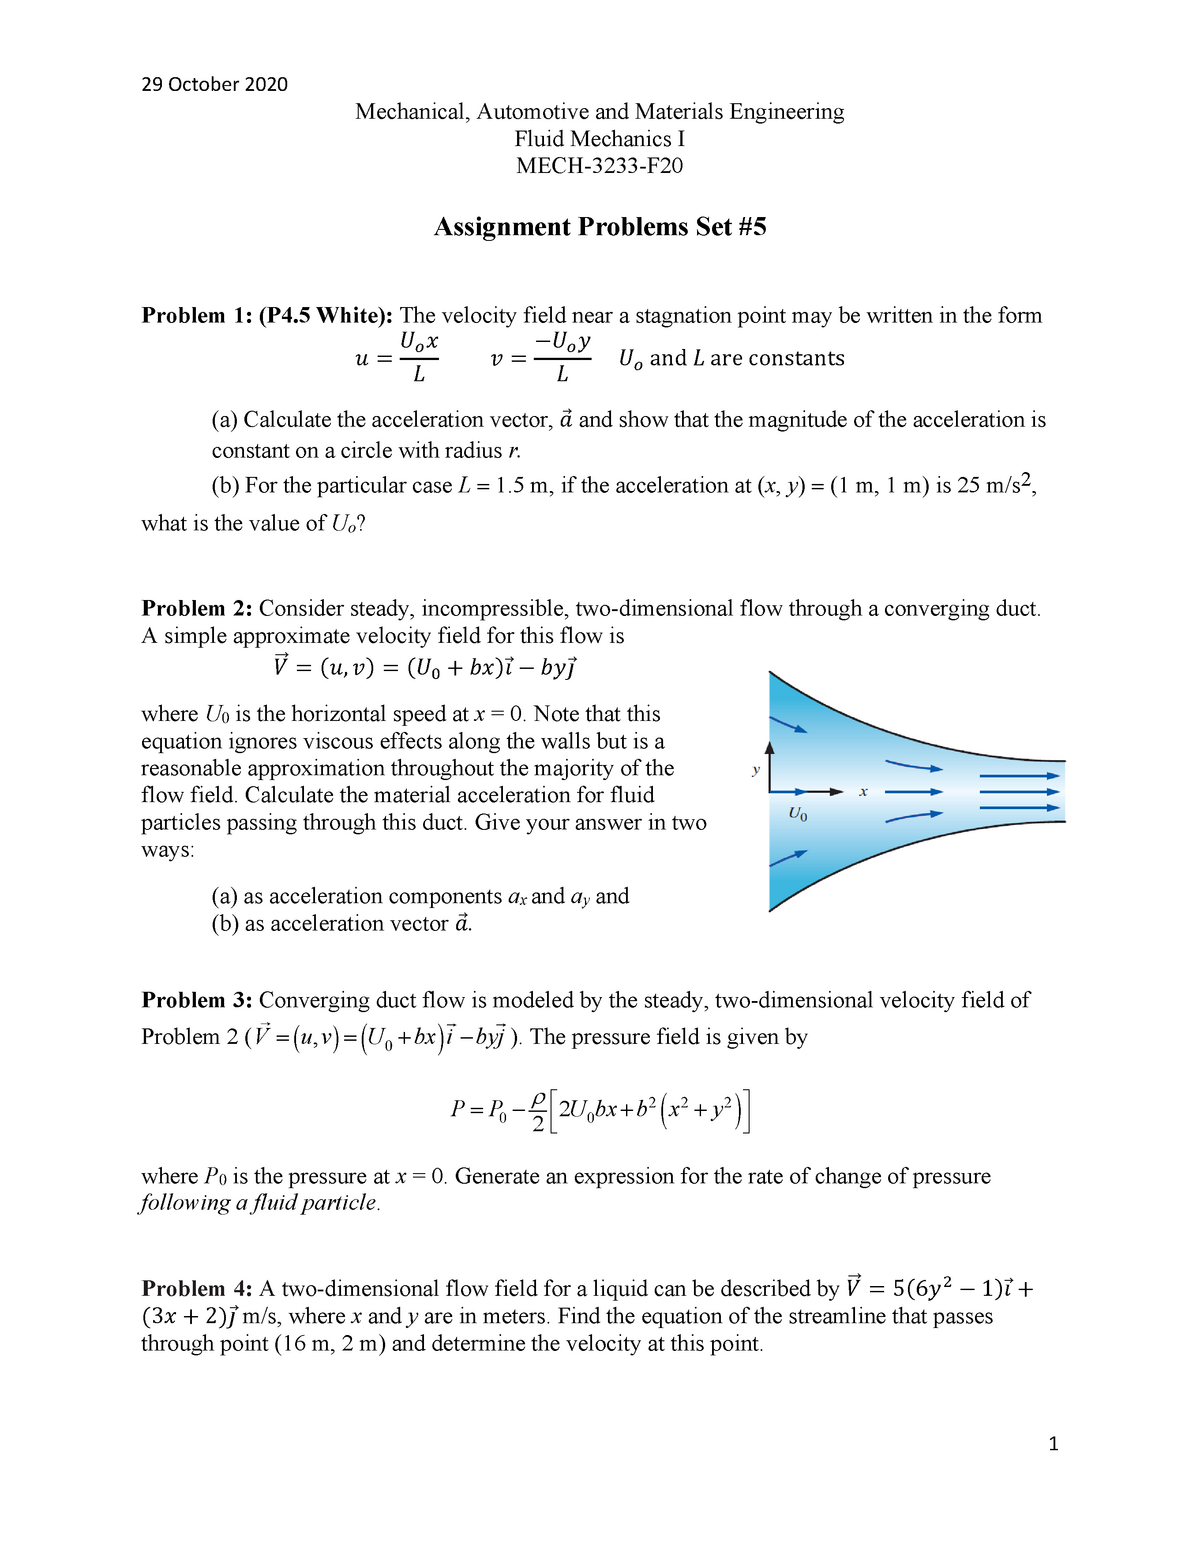 Assignment 5 F Solutions Mechanical Automotive And Materials Engineering Fluid Studocu